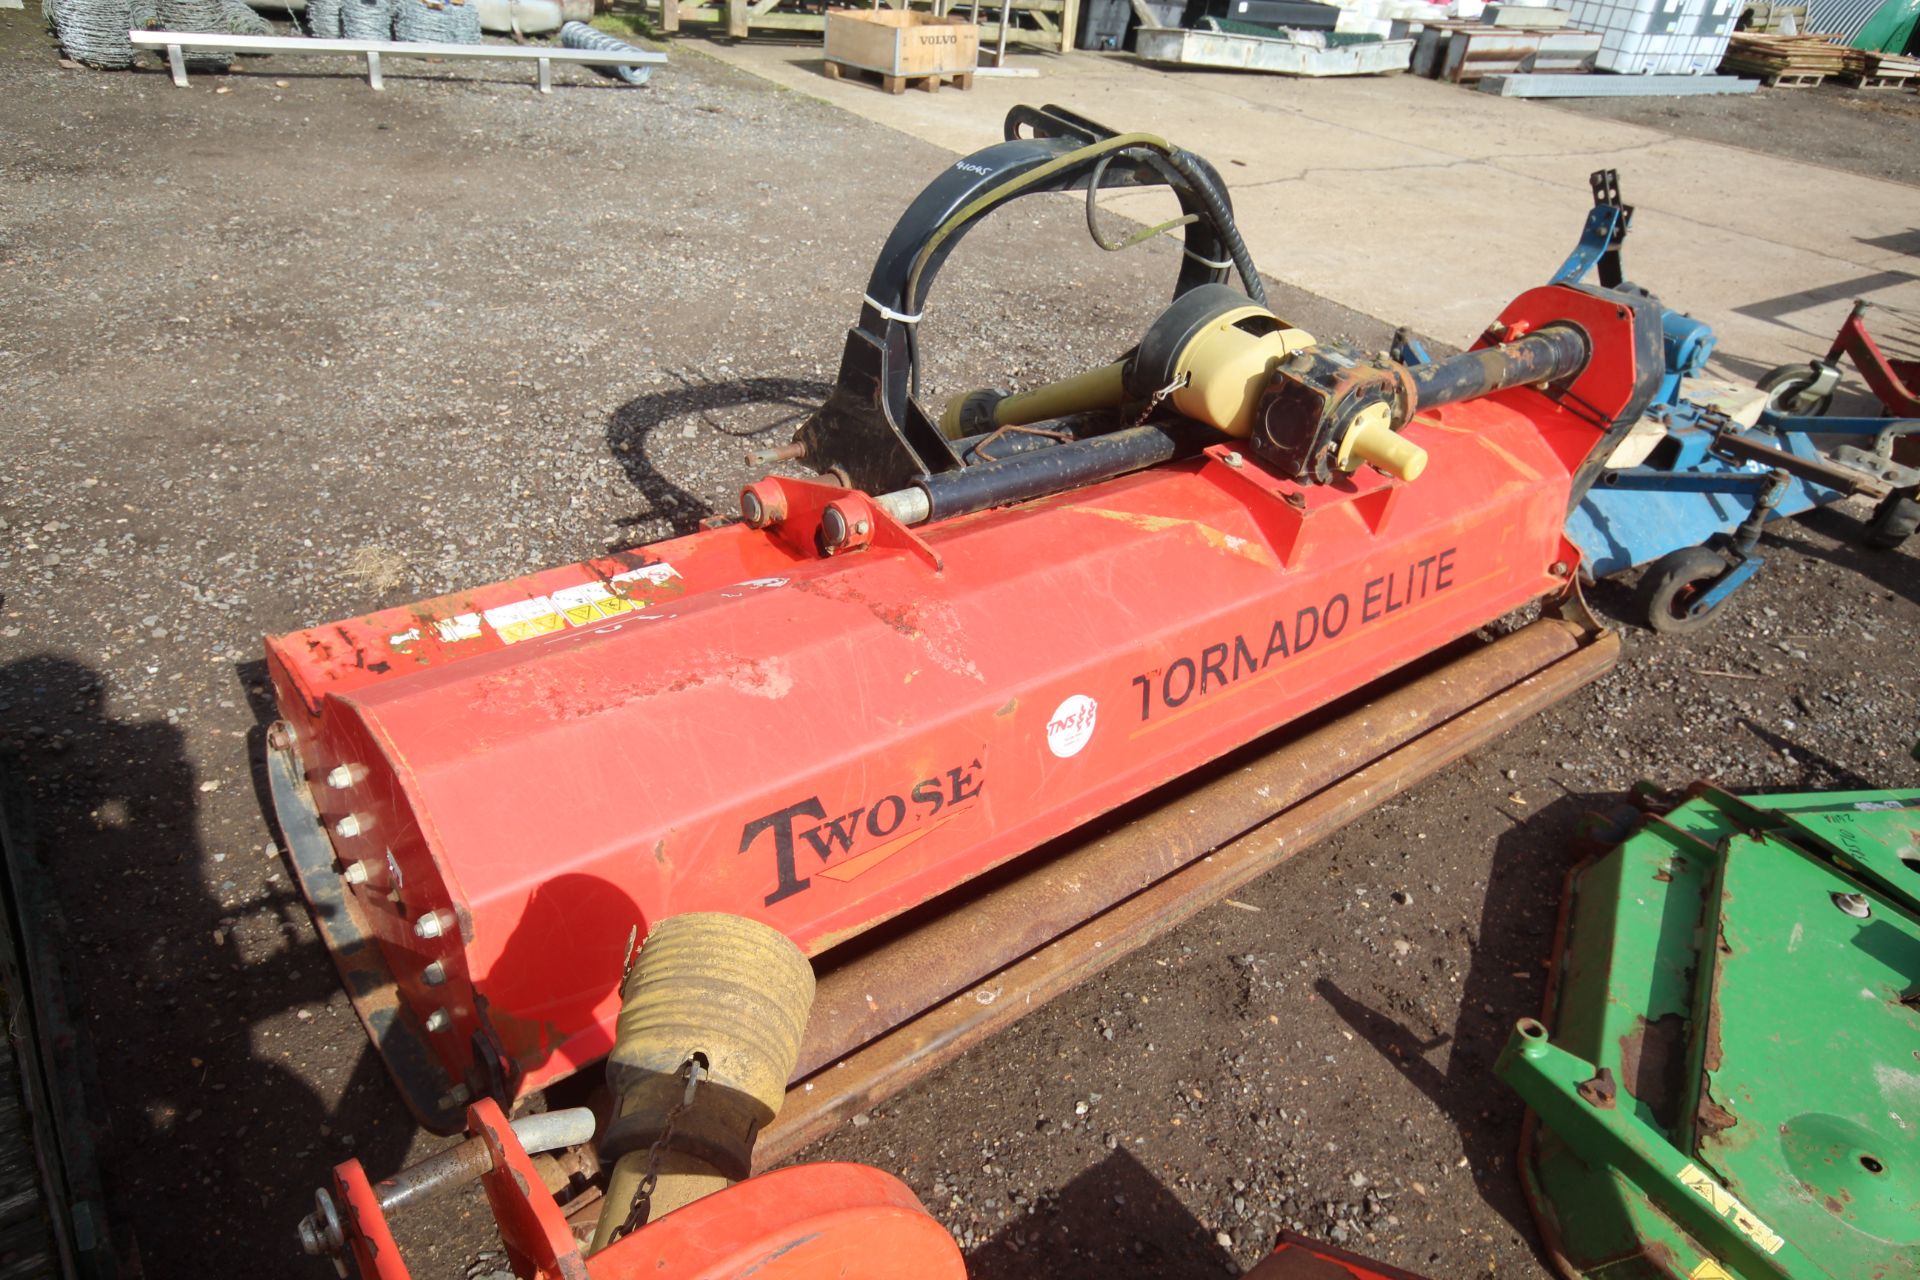 Twose Tornado Elite 7ft6in flail mower. With rear roller and sideshift. V - Image 4 of 15